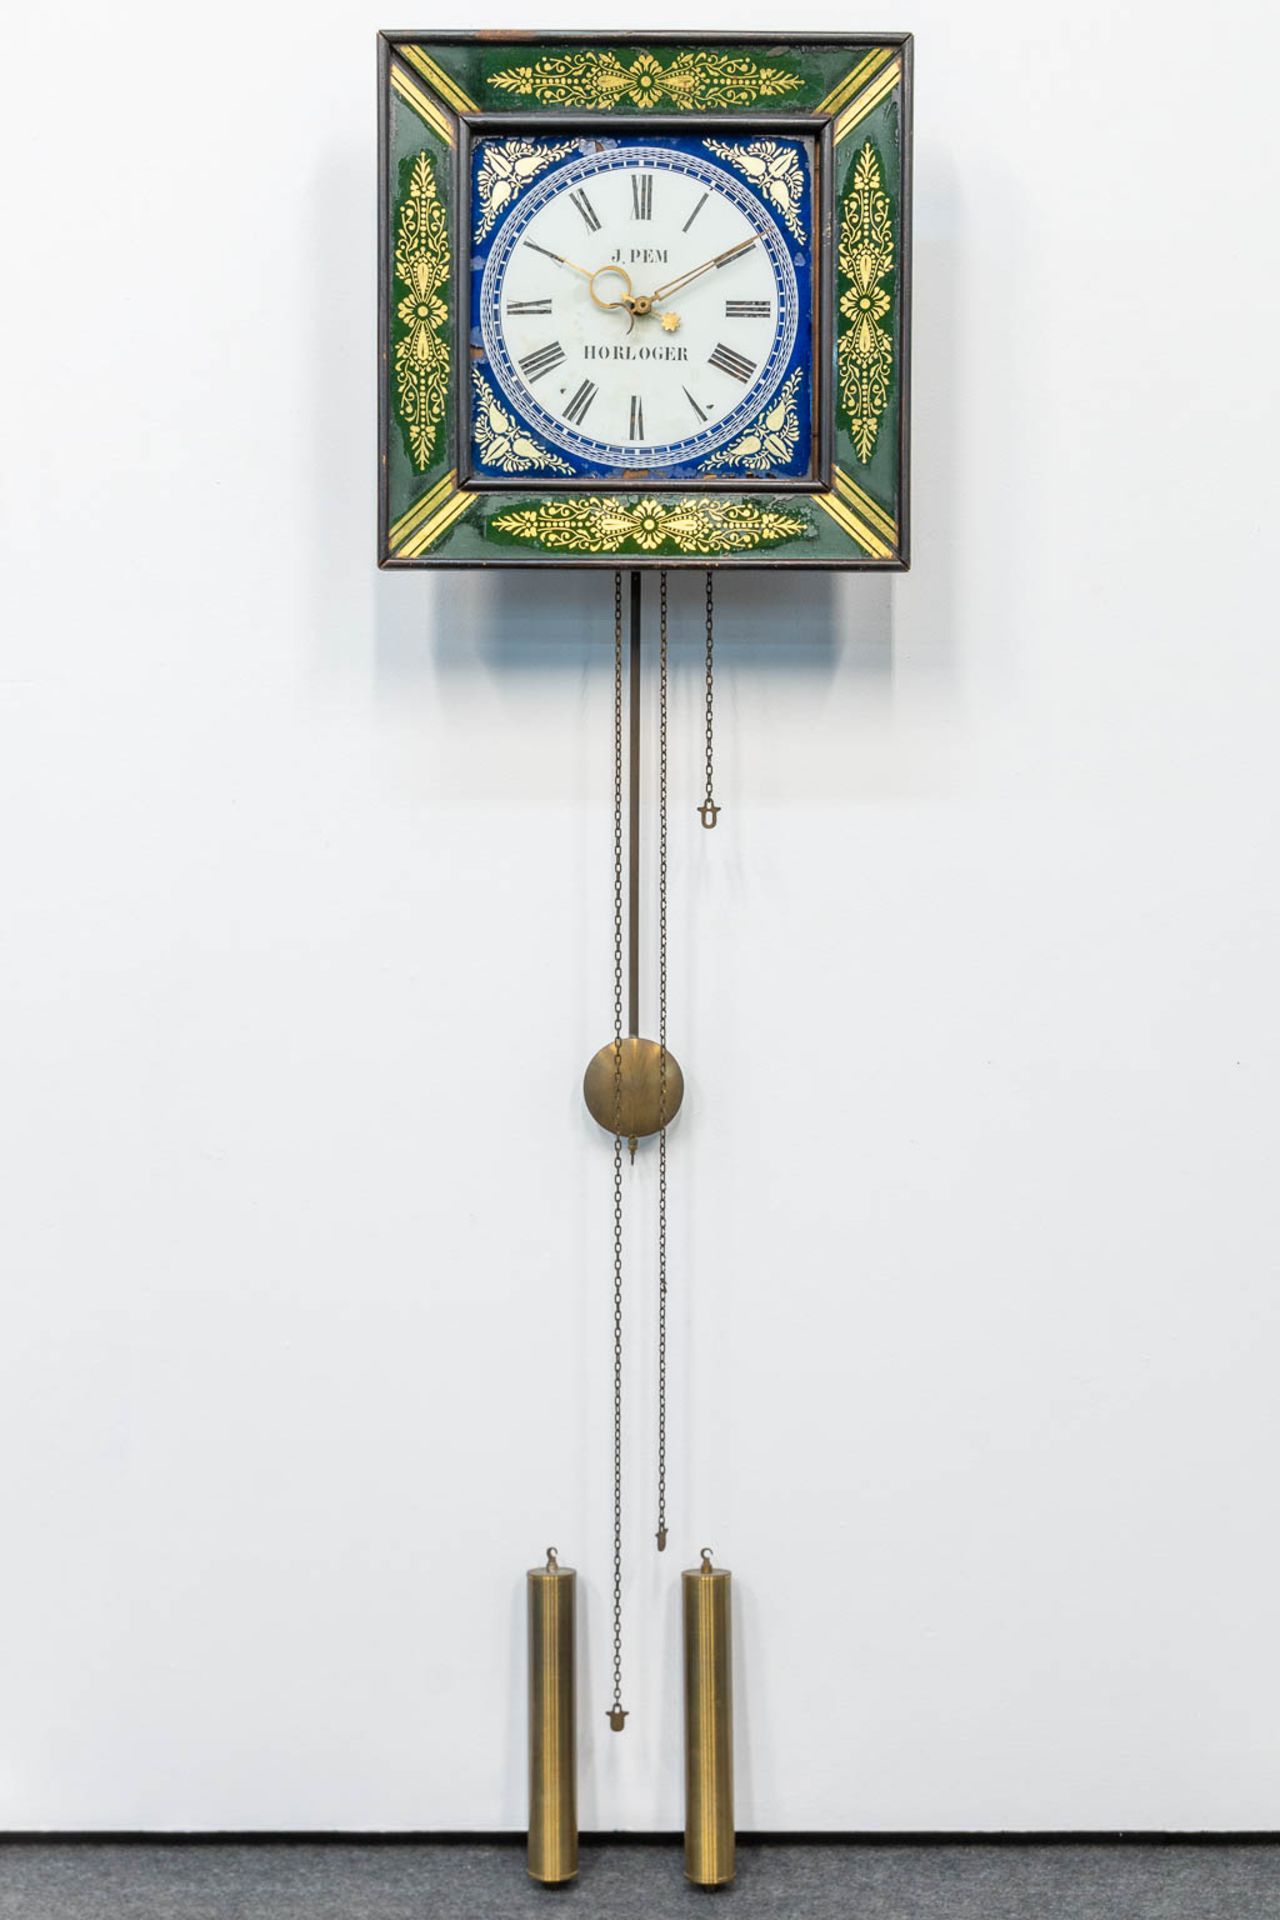 A clock with eglomise reverse glass painting, marked J. Pem Horloger. (12 x 39 x 39 cm) - Image 2 of 8